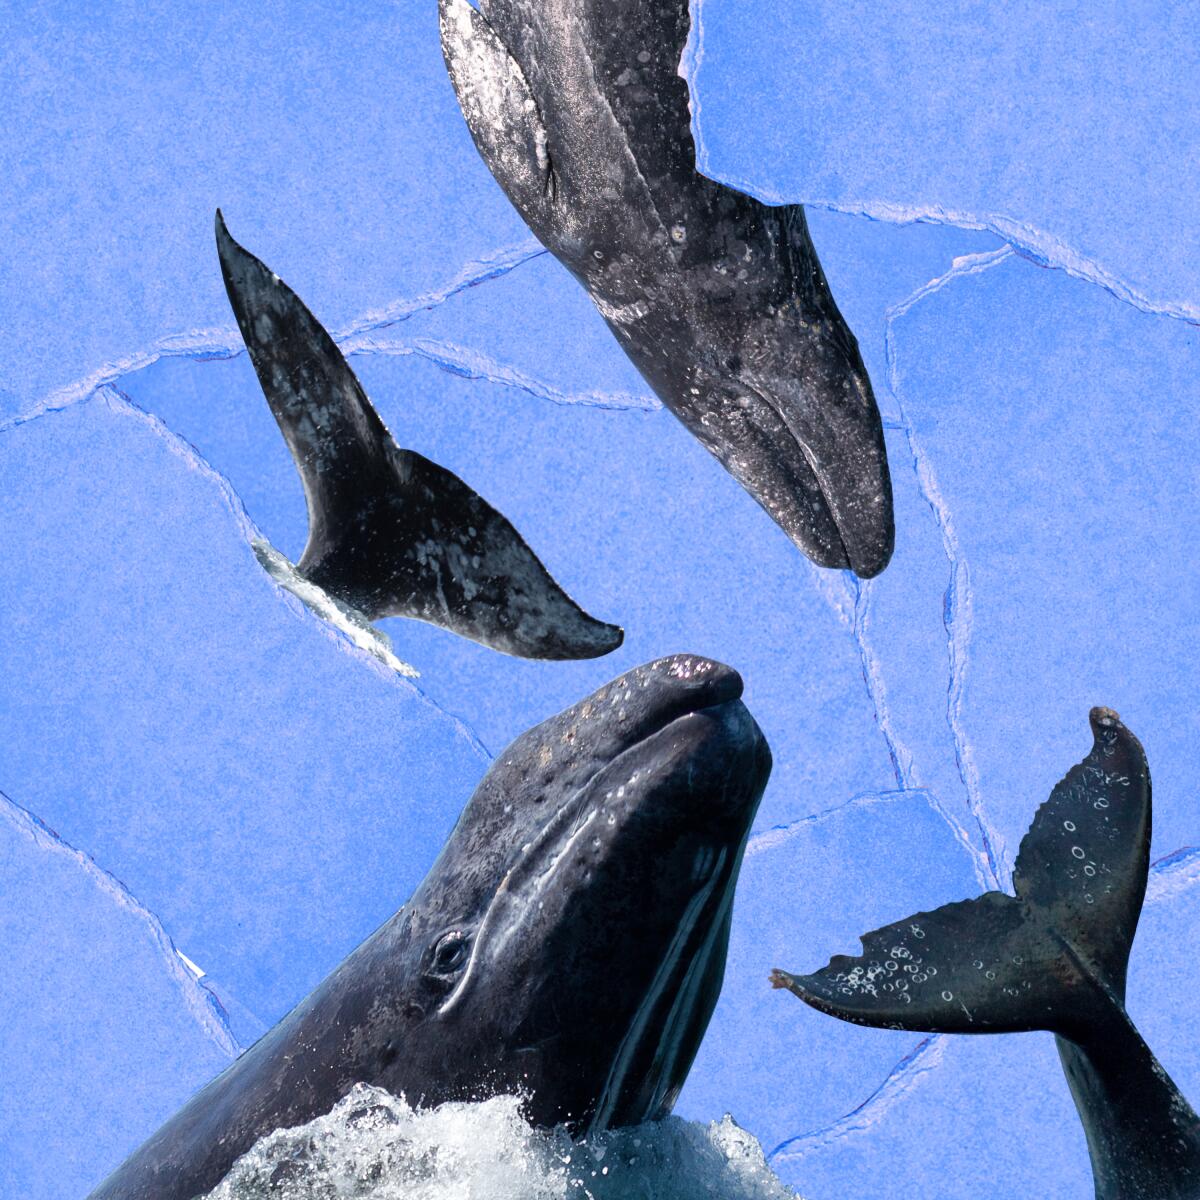 An illustration showing heads and tails of  gray whales.